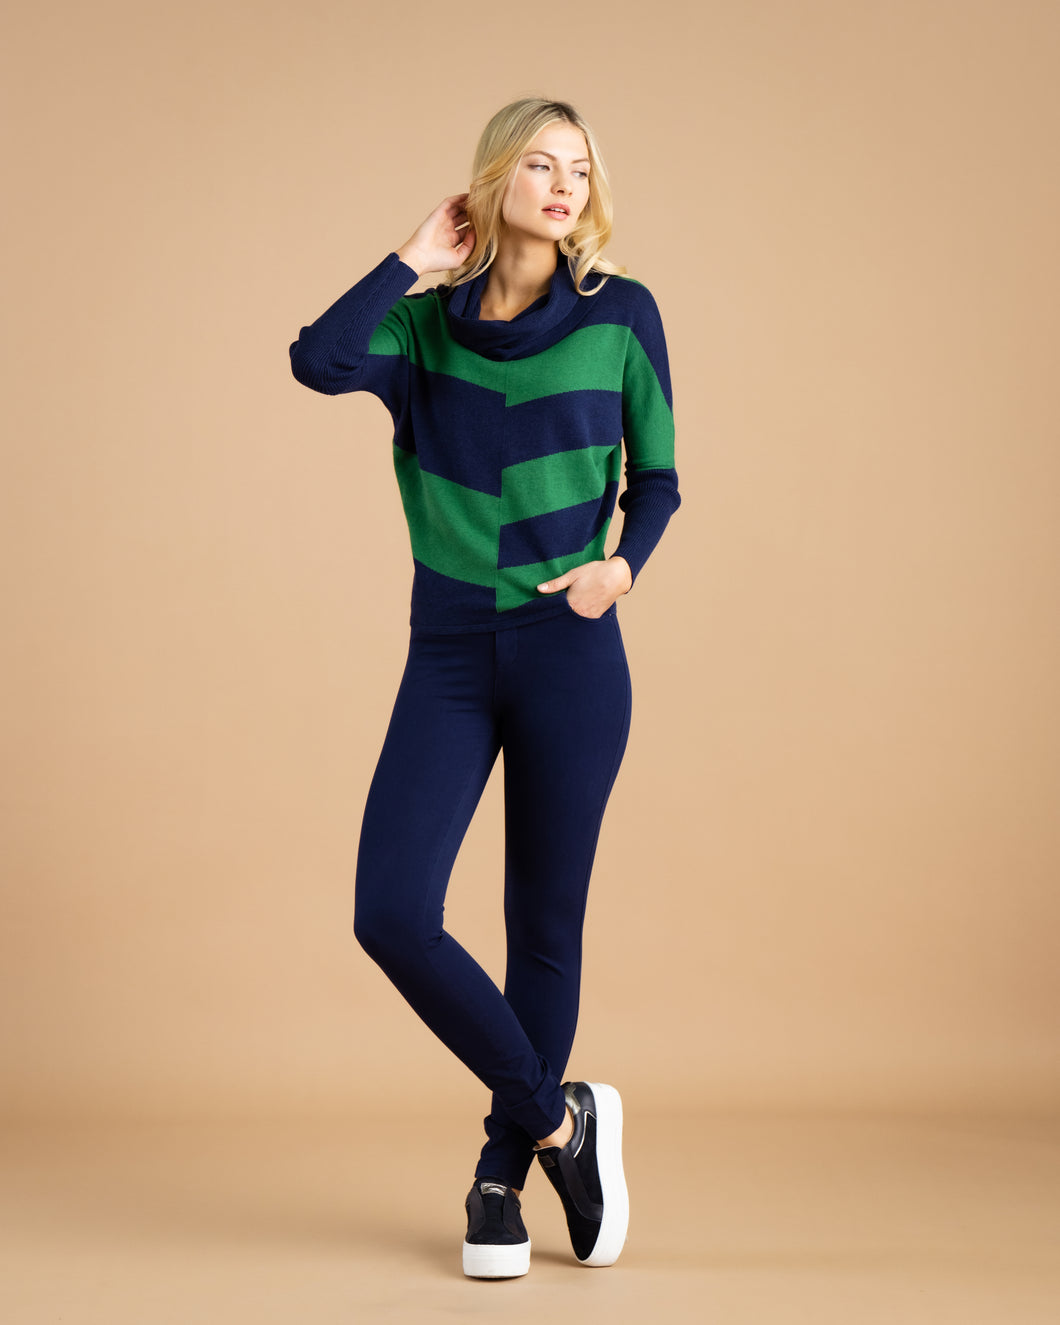 Marble Two Tone Navy Green Oversized Cowl Neck Sweater - 100% Cotton